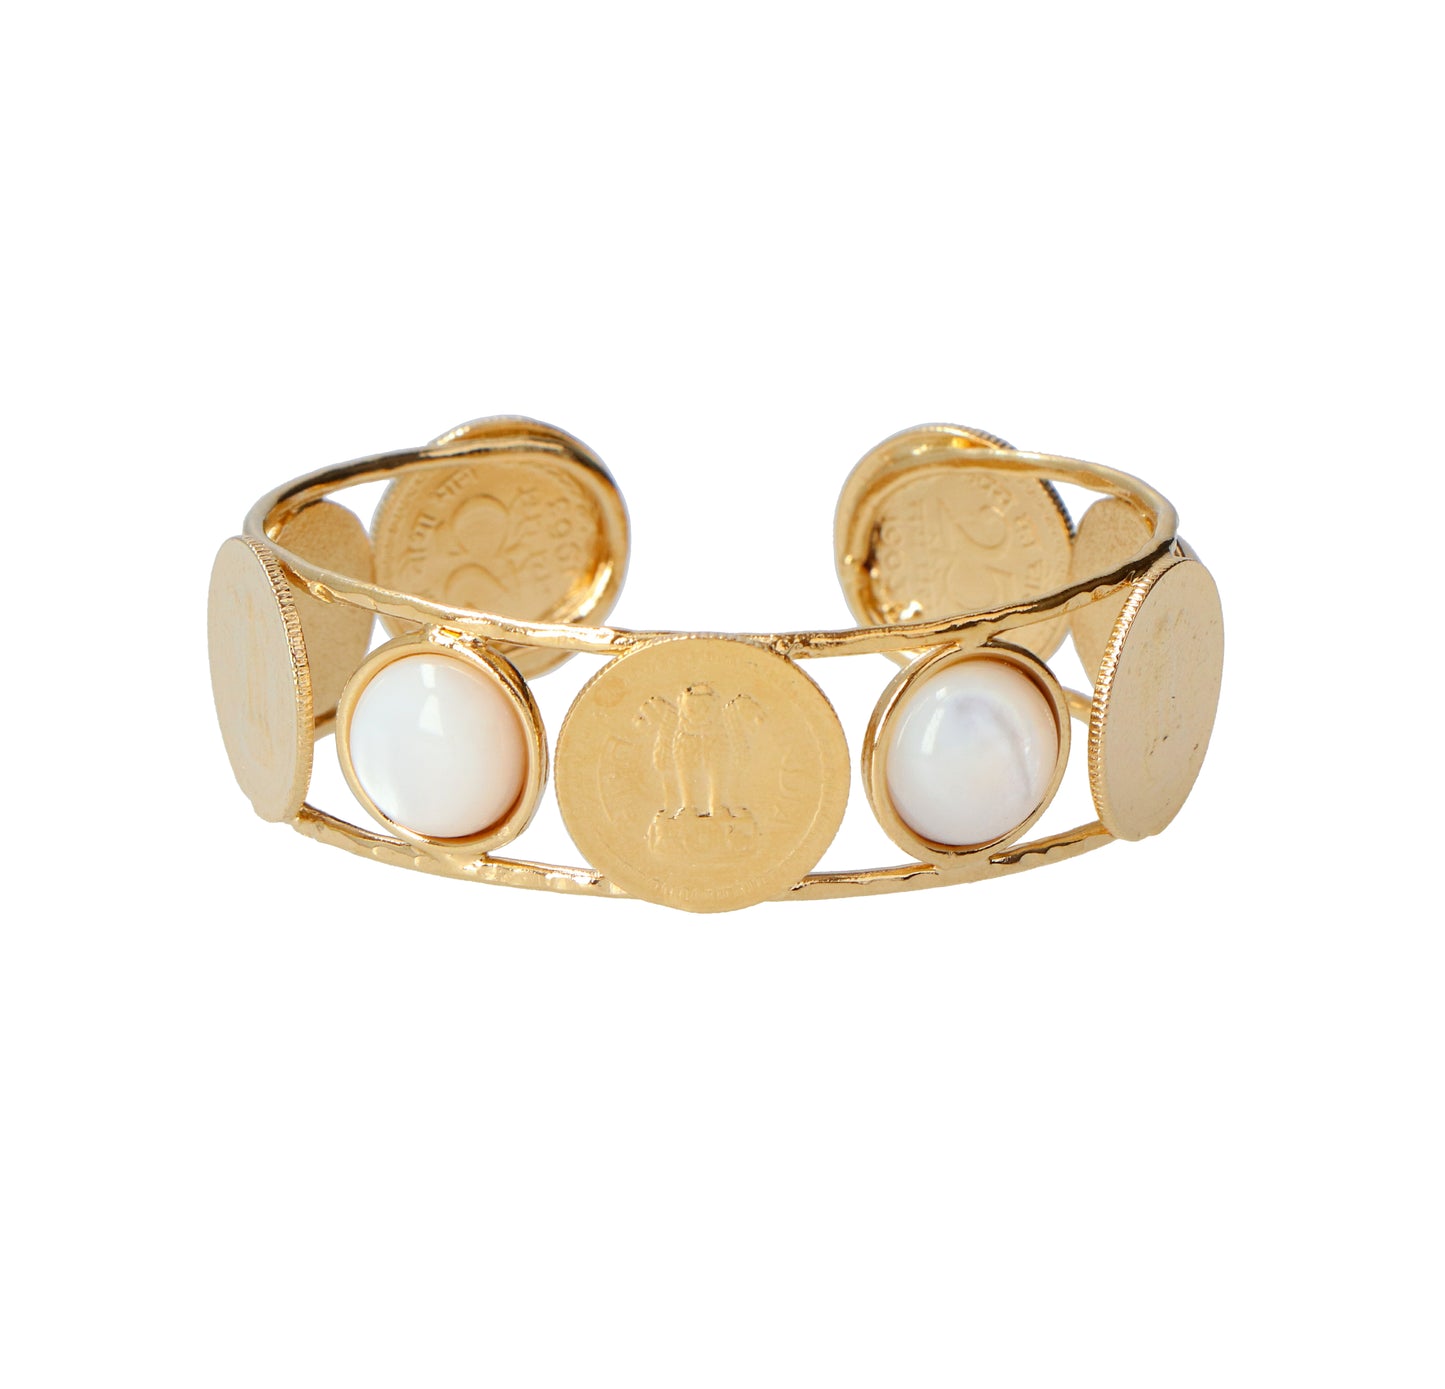 Bangalore Mother of Pearl Cuff